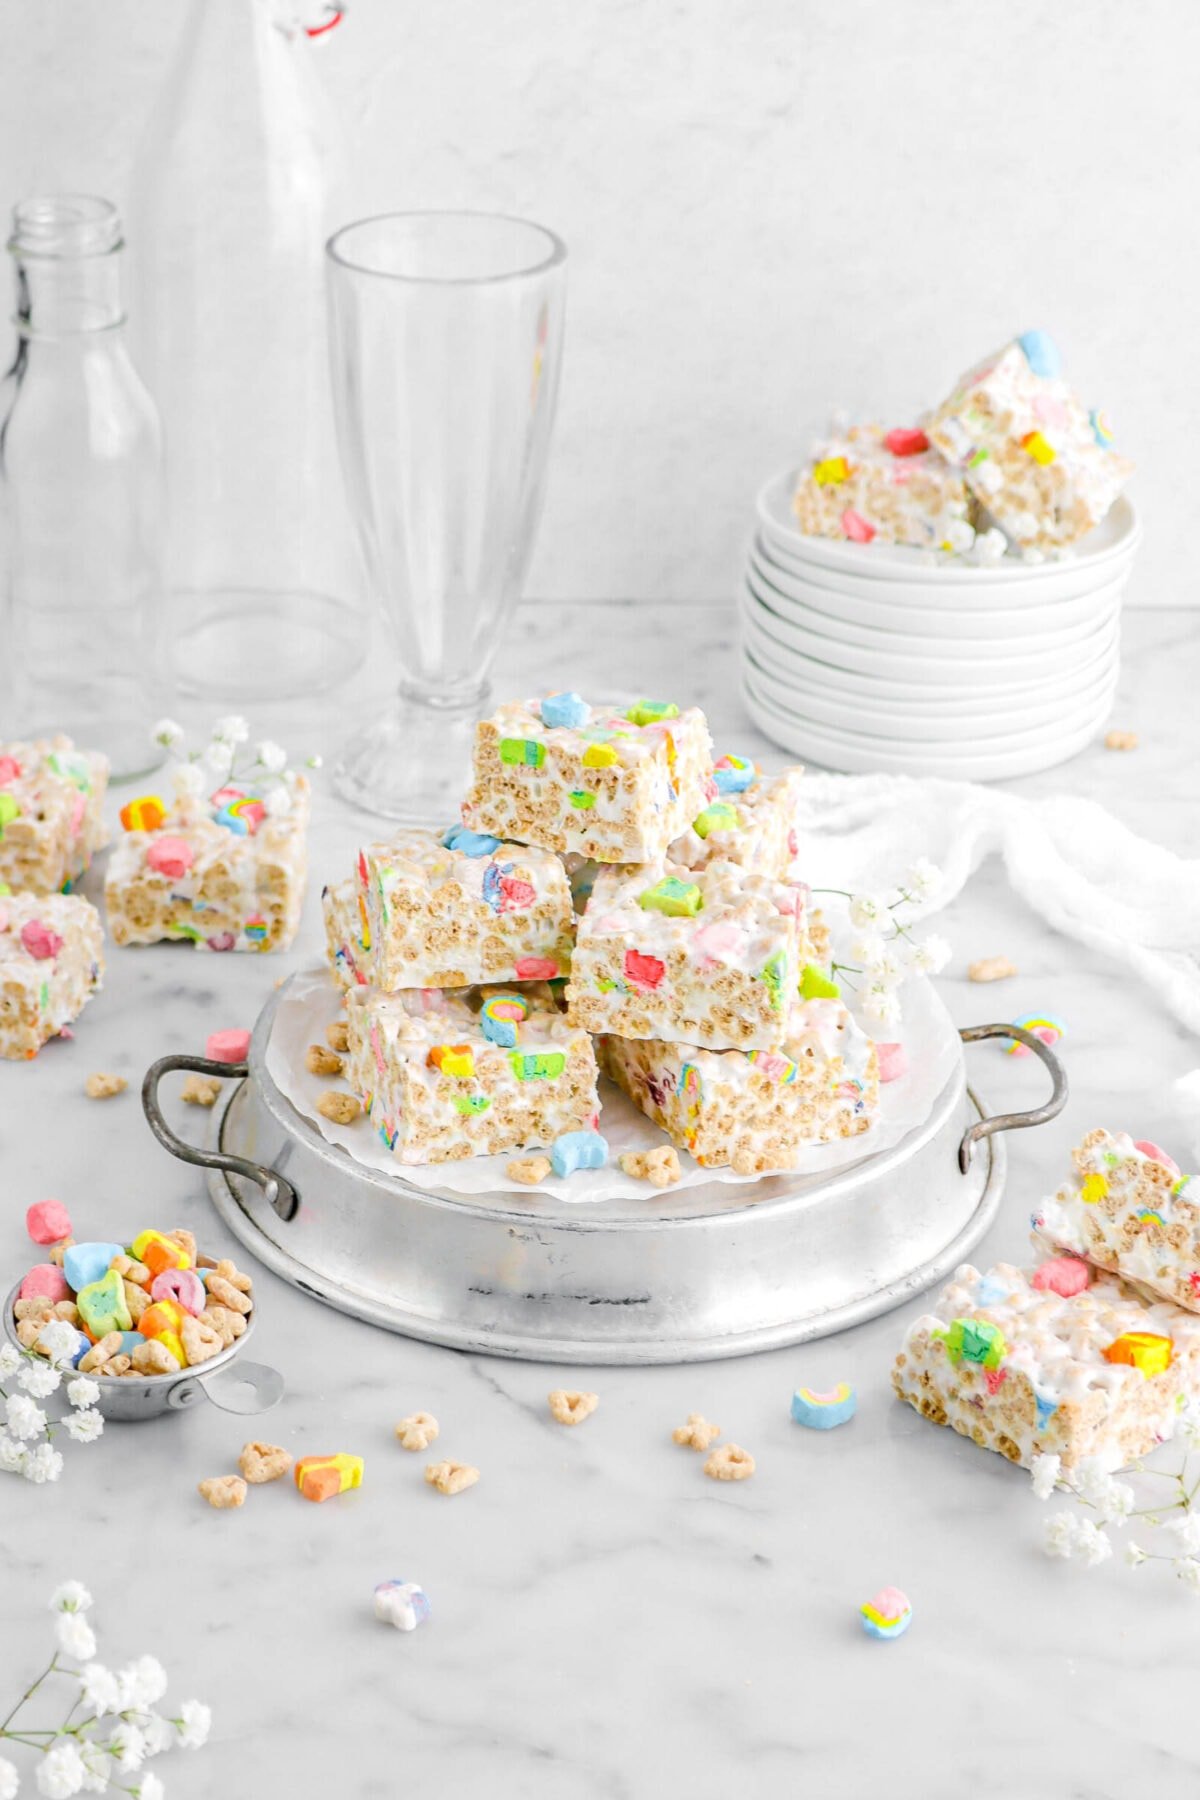 pulled back shot of lucky charms marshmallow treats stacked on upside down cake pan with measuring cup of cereal beside, more marshmallow treats around, a stack of white plates, white flowers, and empty glasses behind.